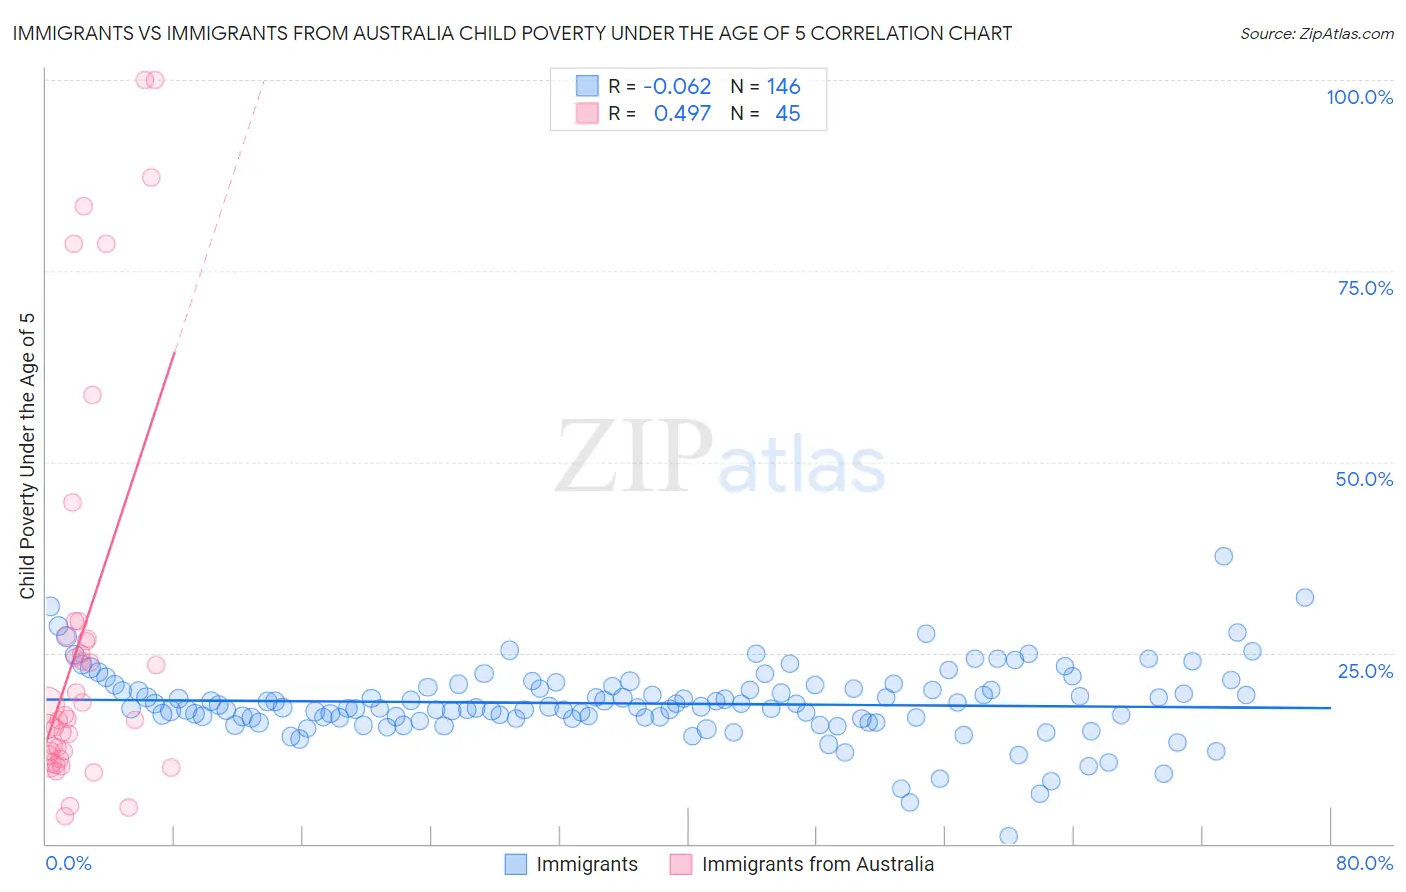 Immigrants vs Immigrants from Australia Child Poverty Under the Age of 5